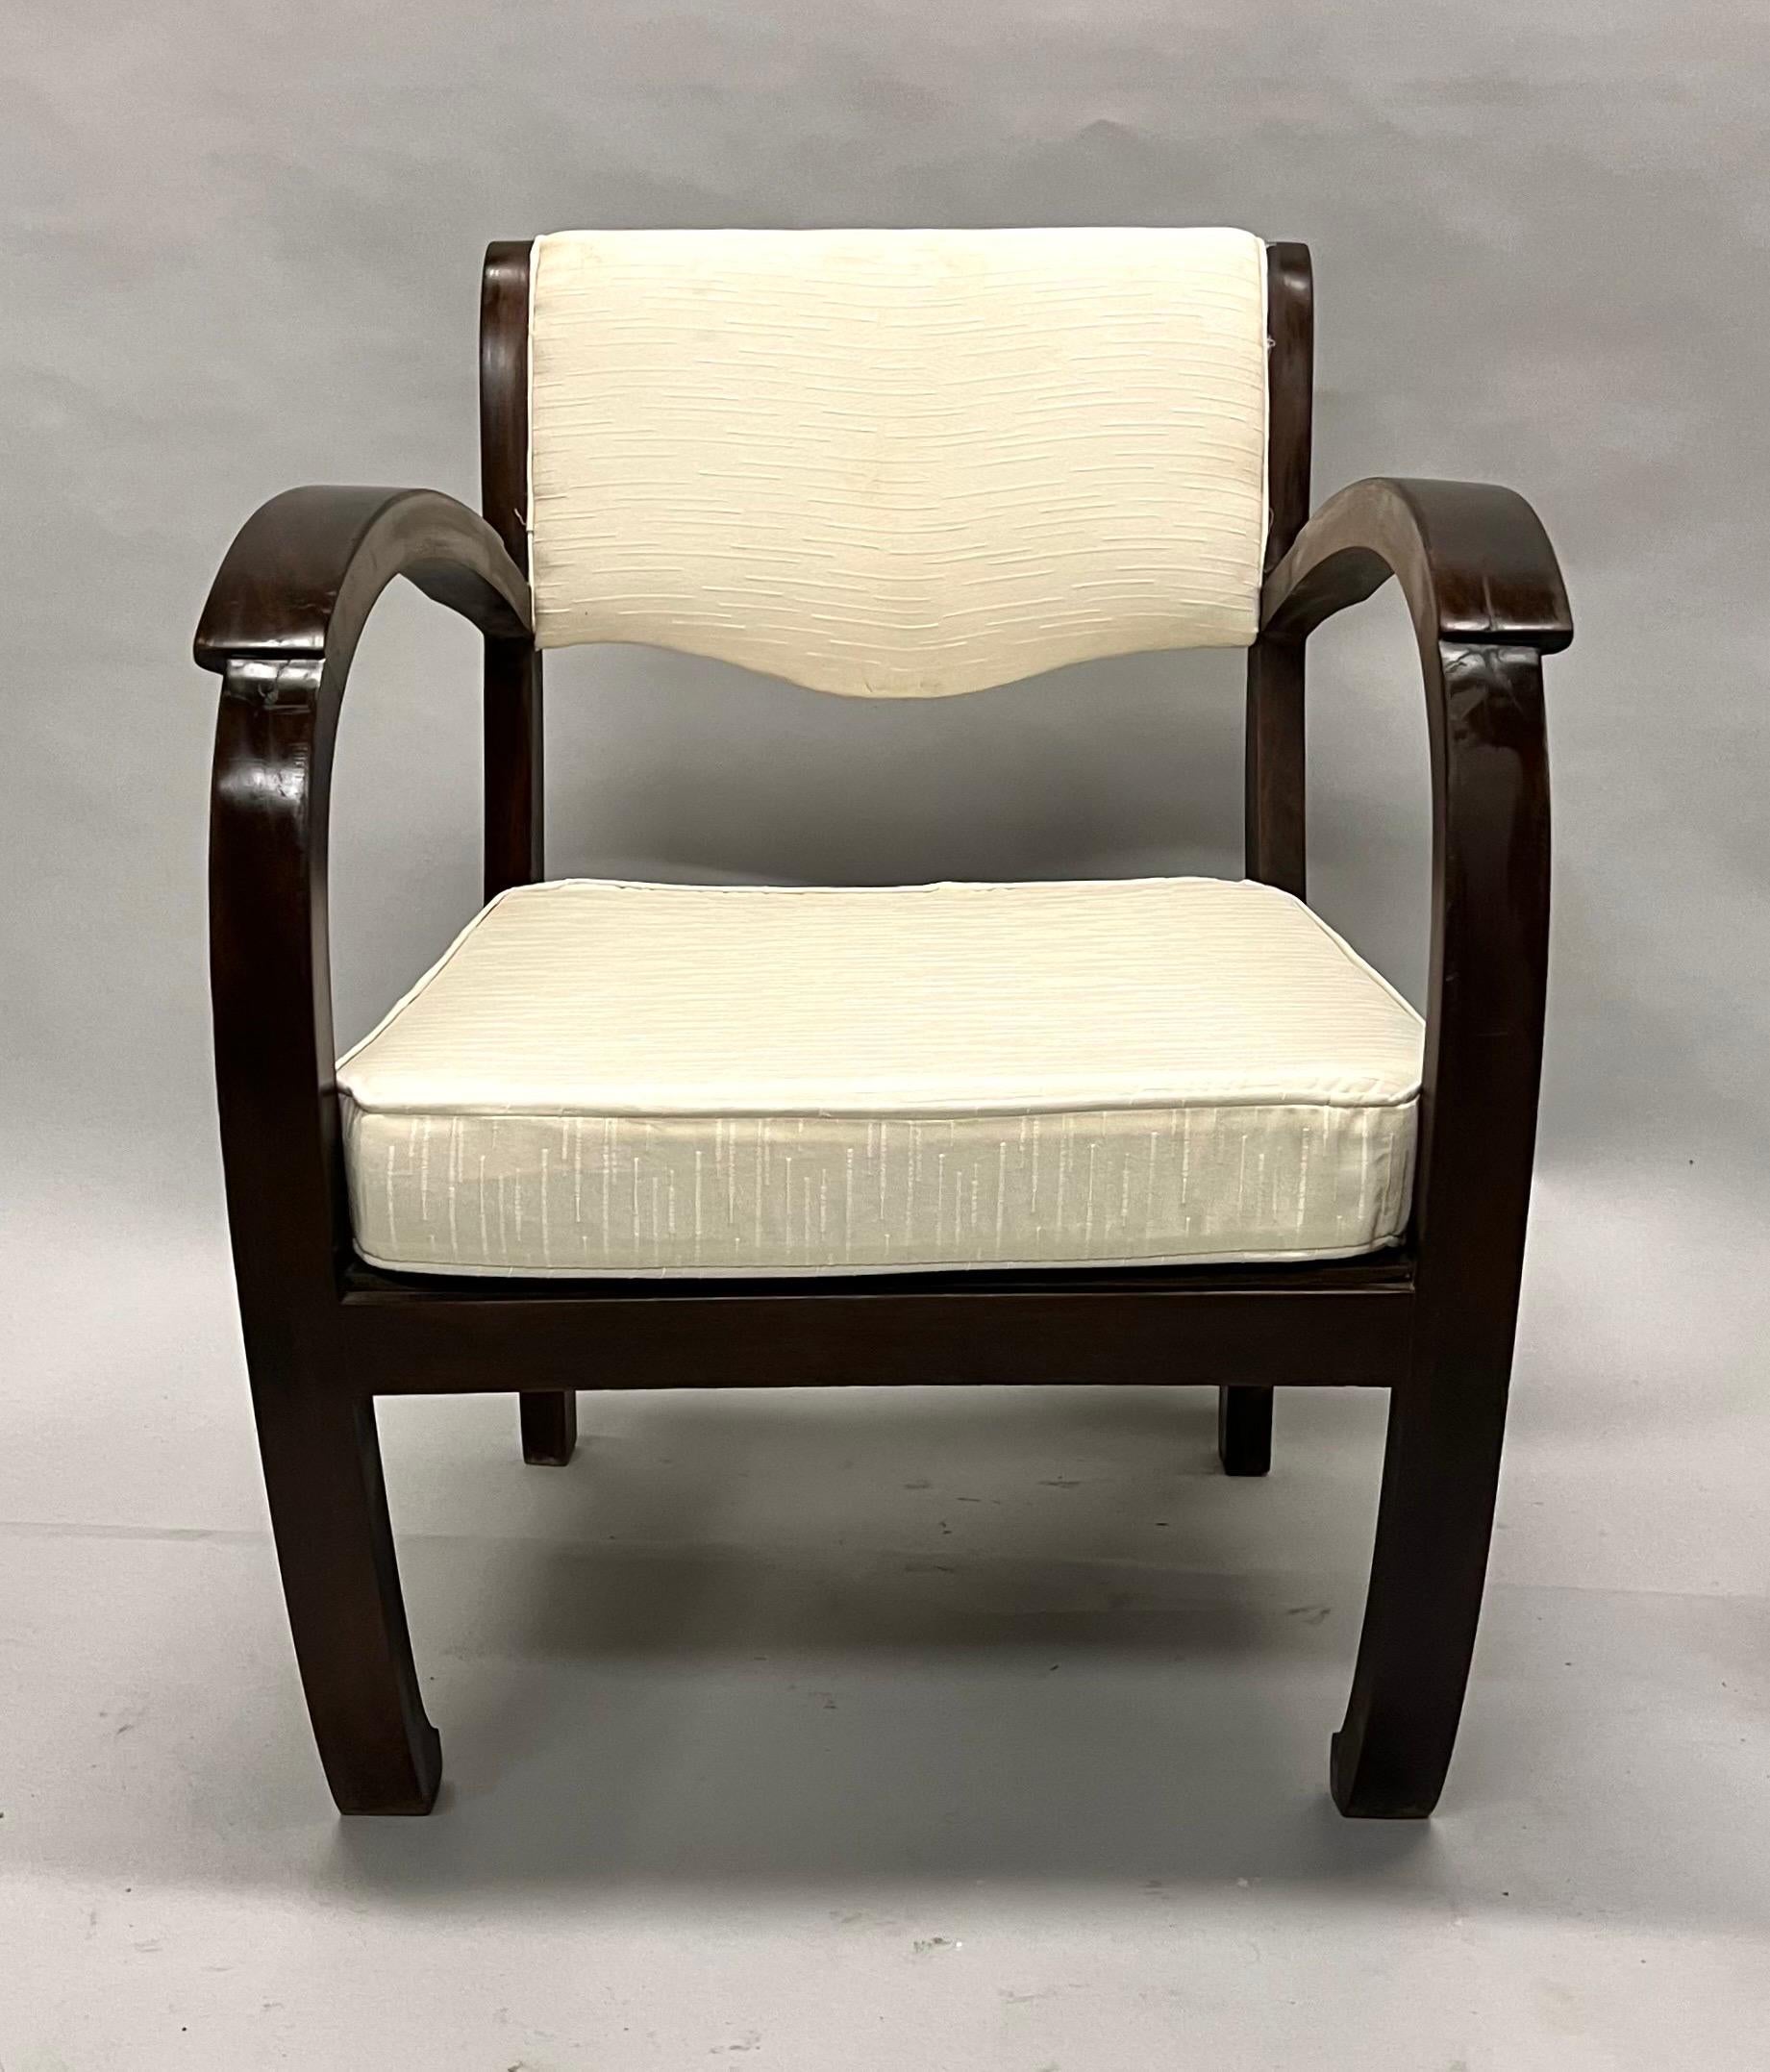 20th Century Rare French Art Deco Hand Carved Teak Armchairs/ Lounge Chairs, 1920-30 For Sale